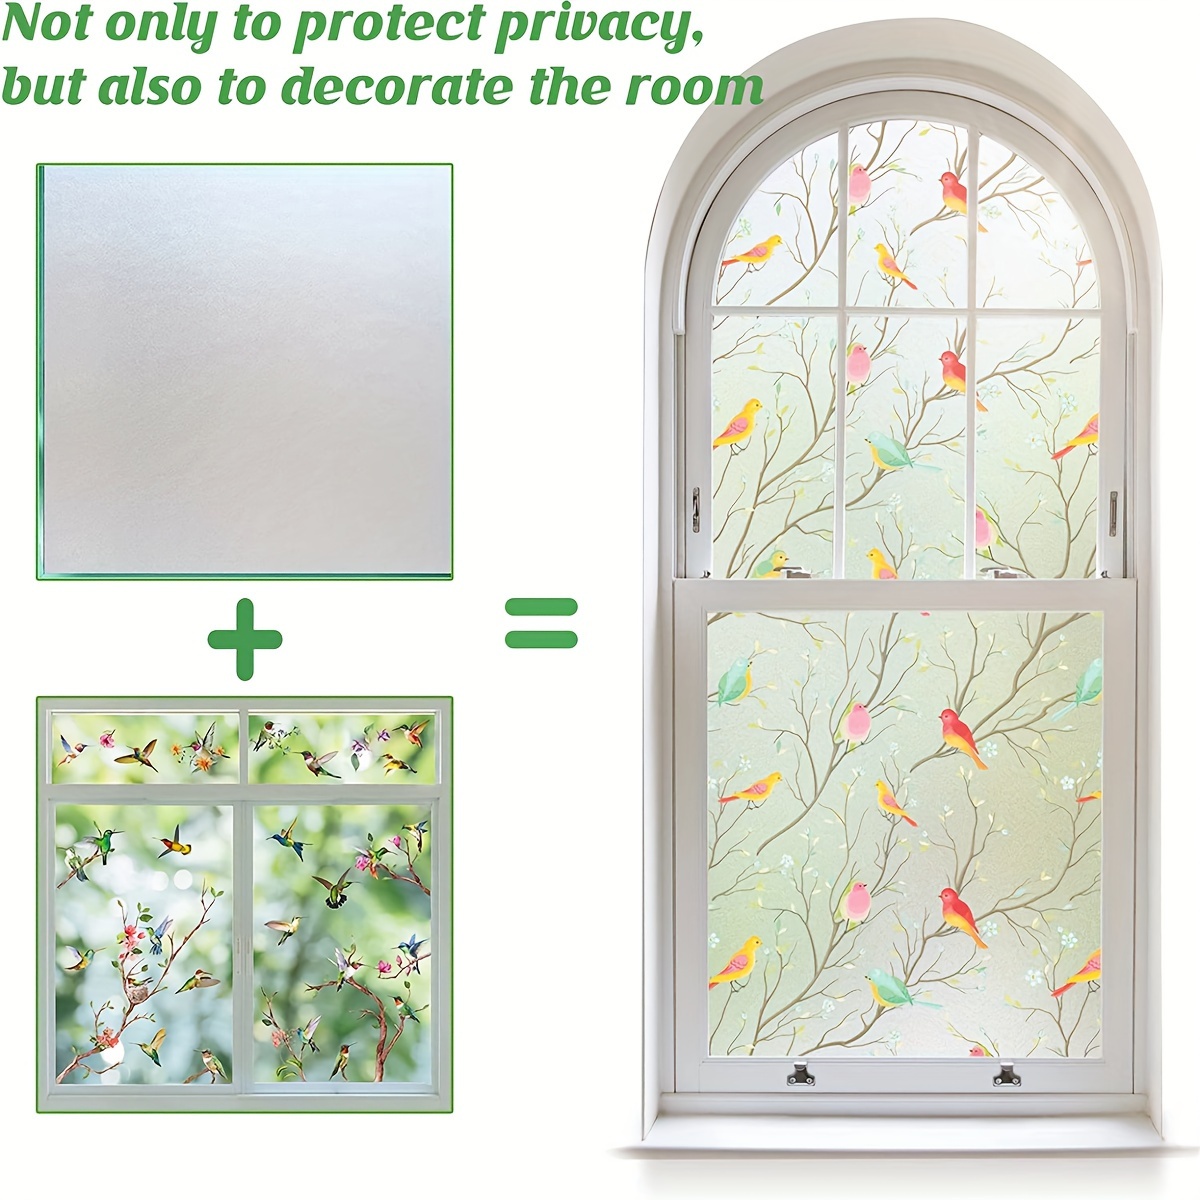 Anti Glare Shower Door Film Flamingo Animal Static Stickers for Windows for  Home Office Removable 23.6 inch by 47.2 inch